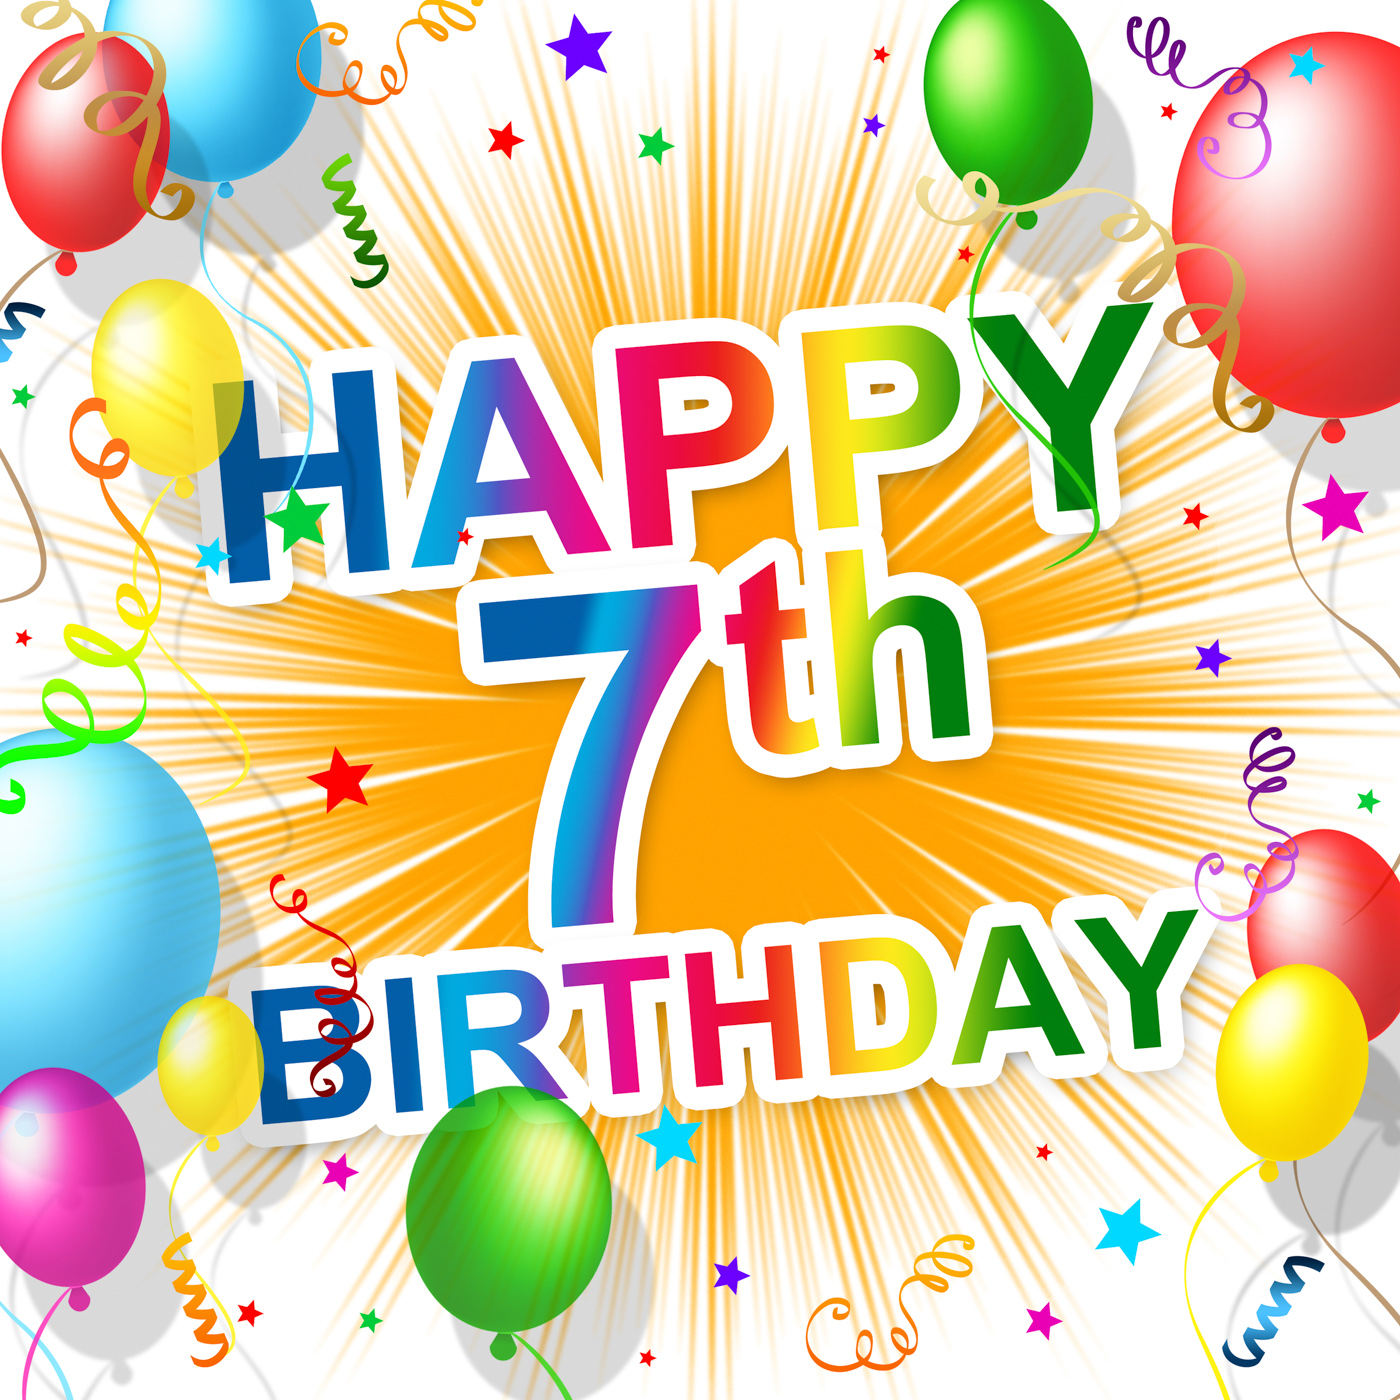 free-photo-birthday-seventh-represents-happiness-7-and-celebration-7